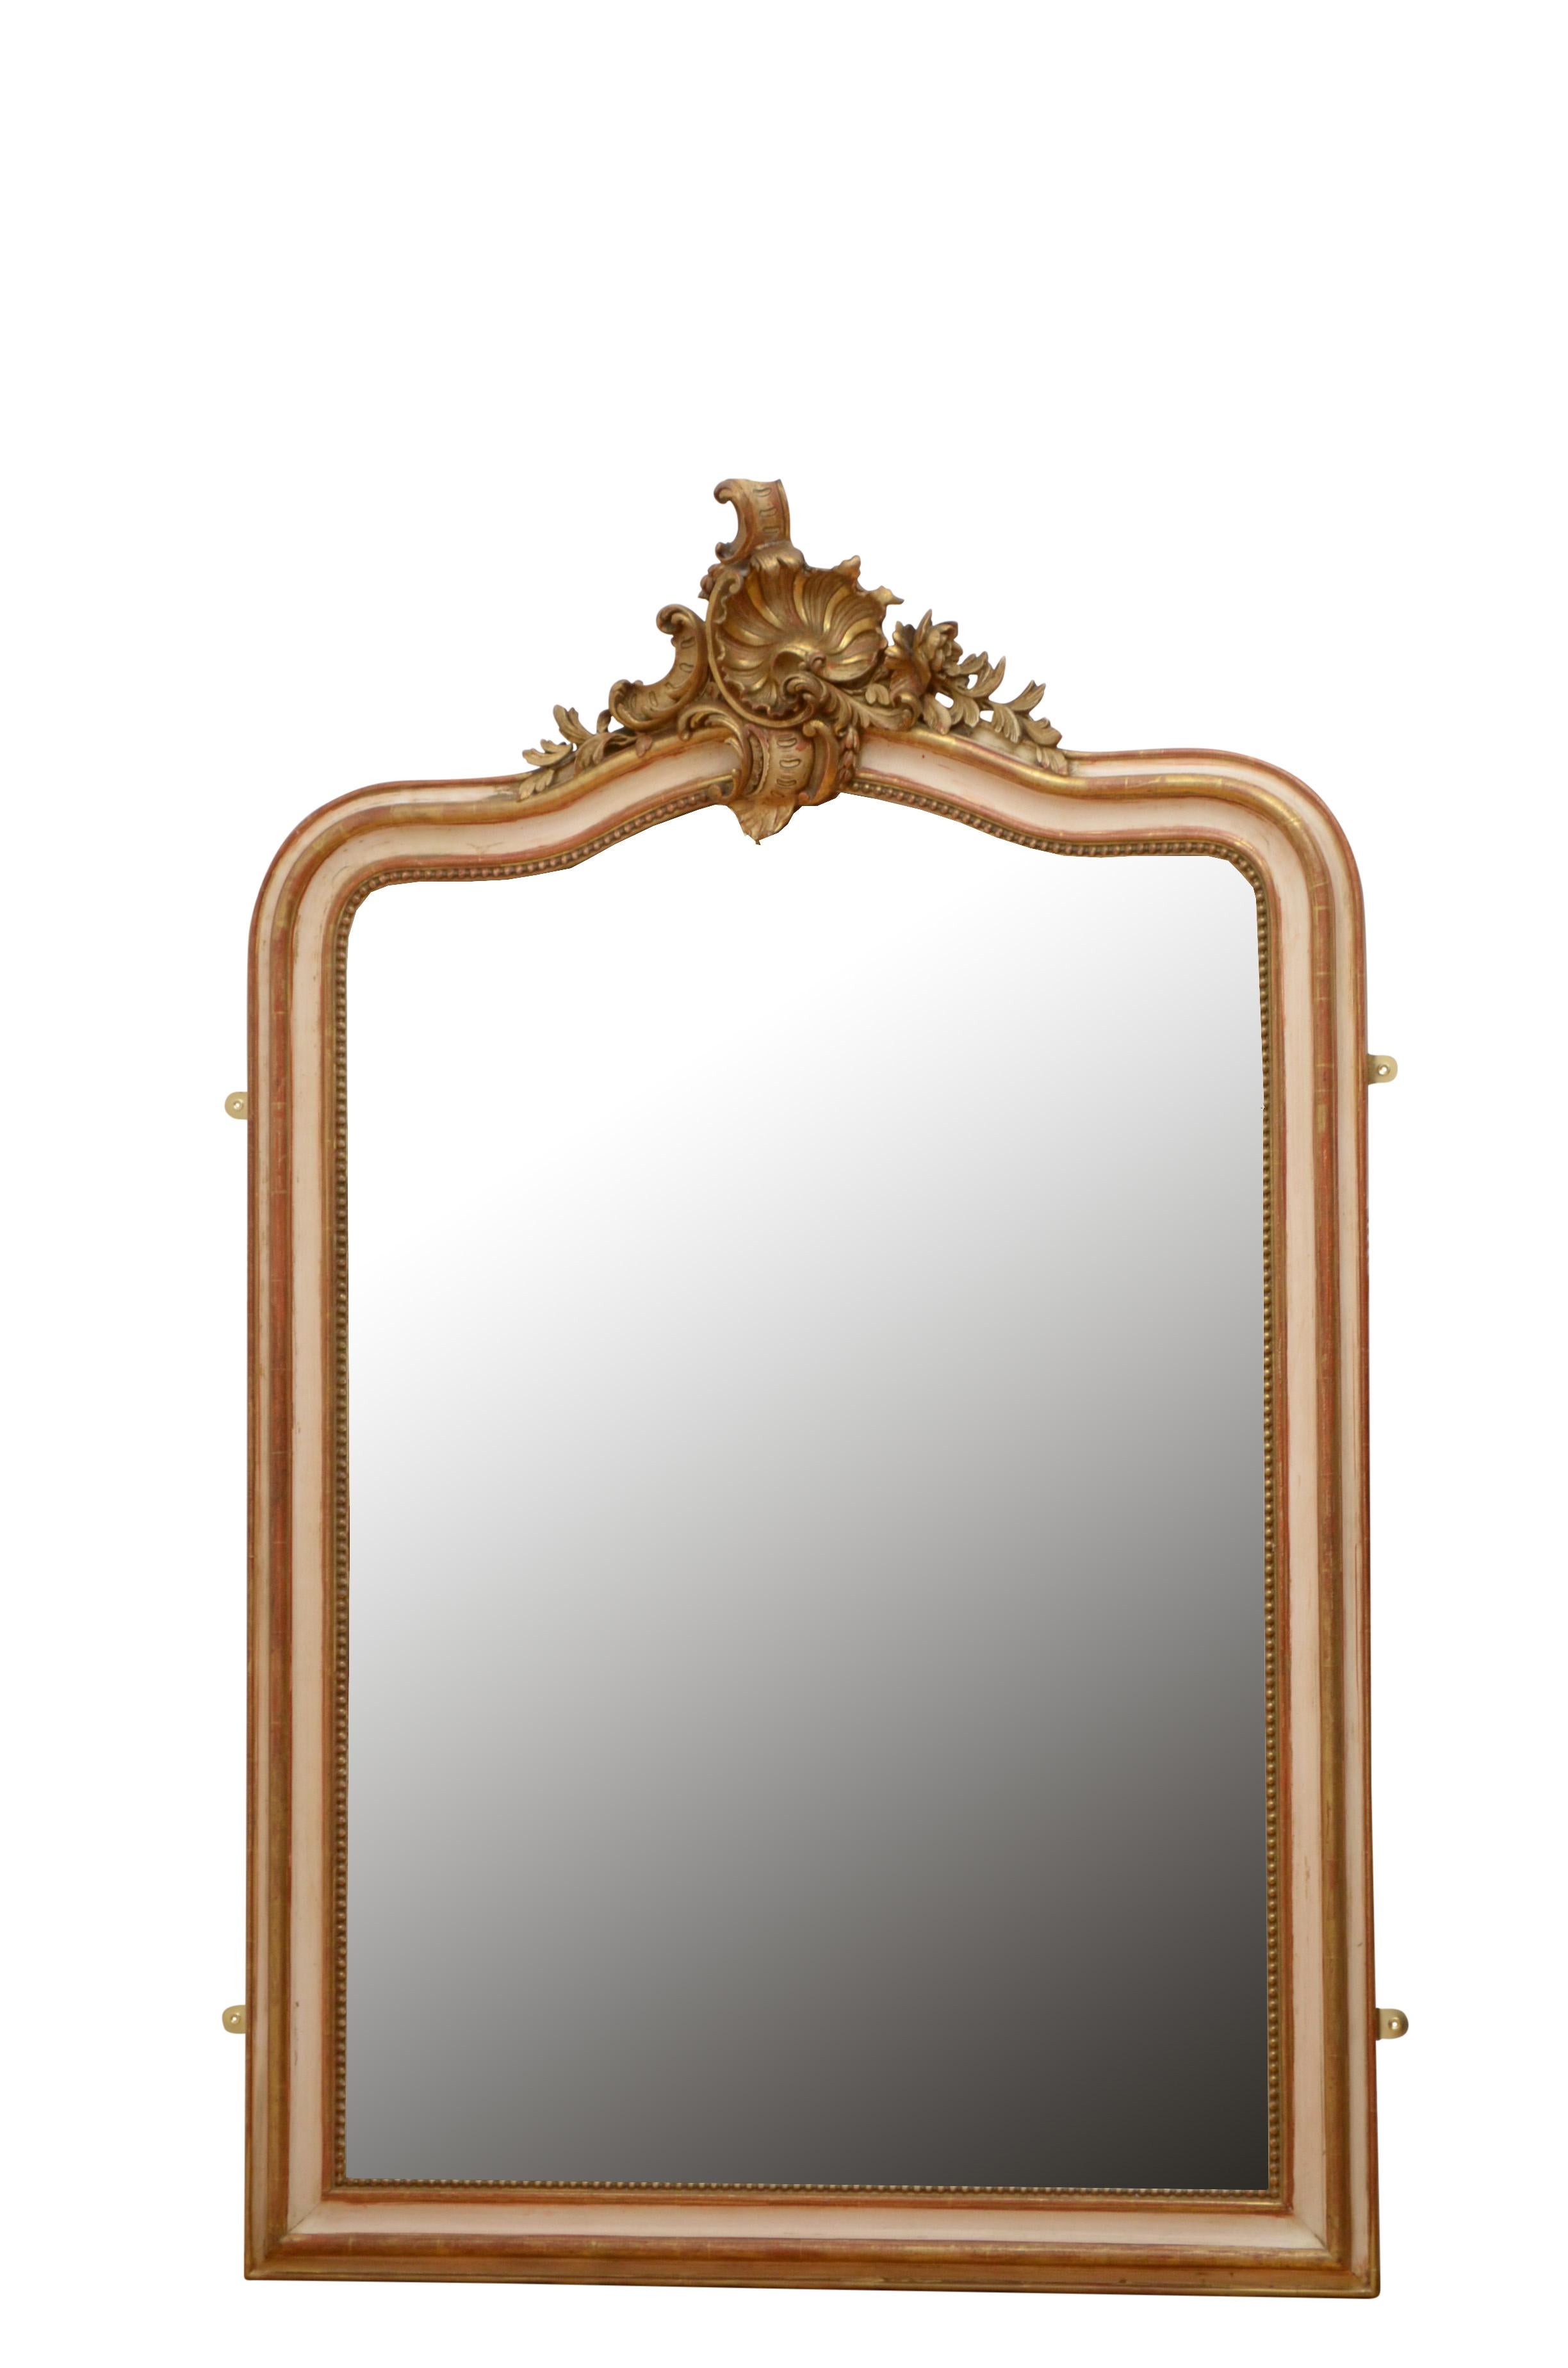 K0467 Beautiful French, cream and gold leaf wall mirror, having original bevelled edge glass with some foxing in beaded and shaped frame with shell and floral centre crest to the top. This antique mirror retains its original glass, original gold